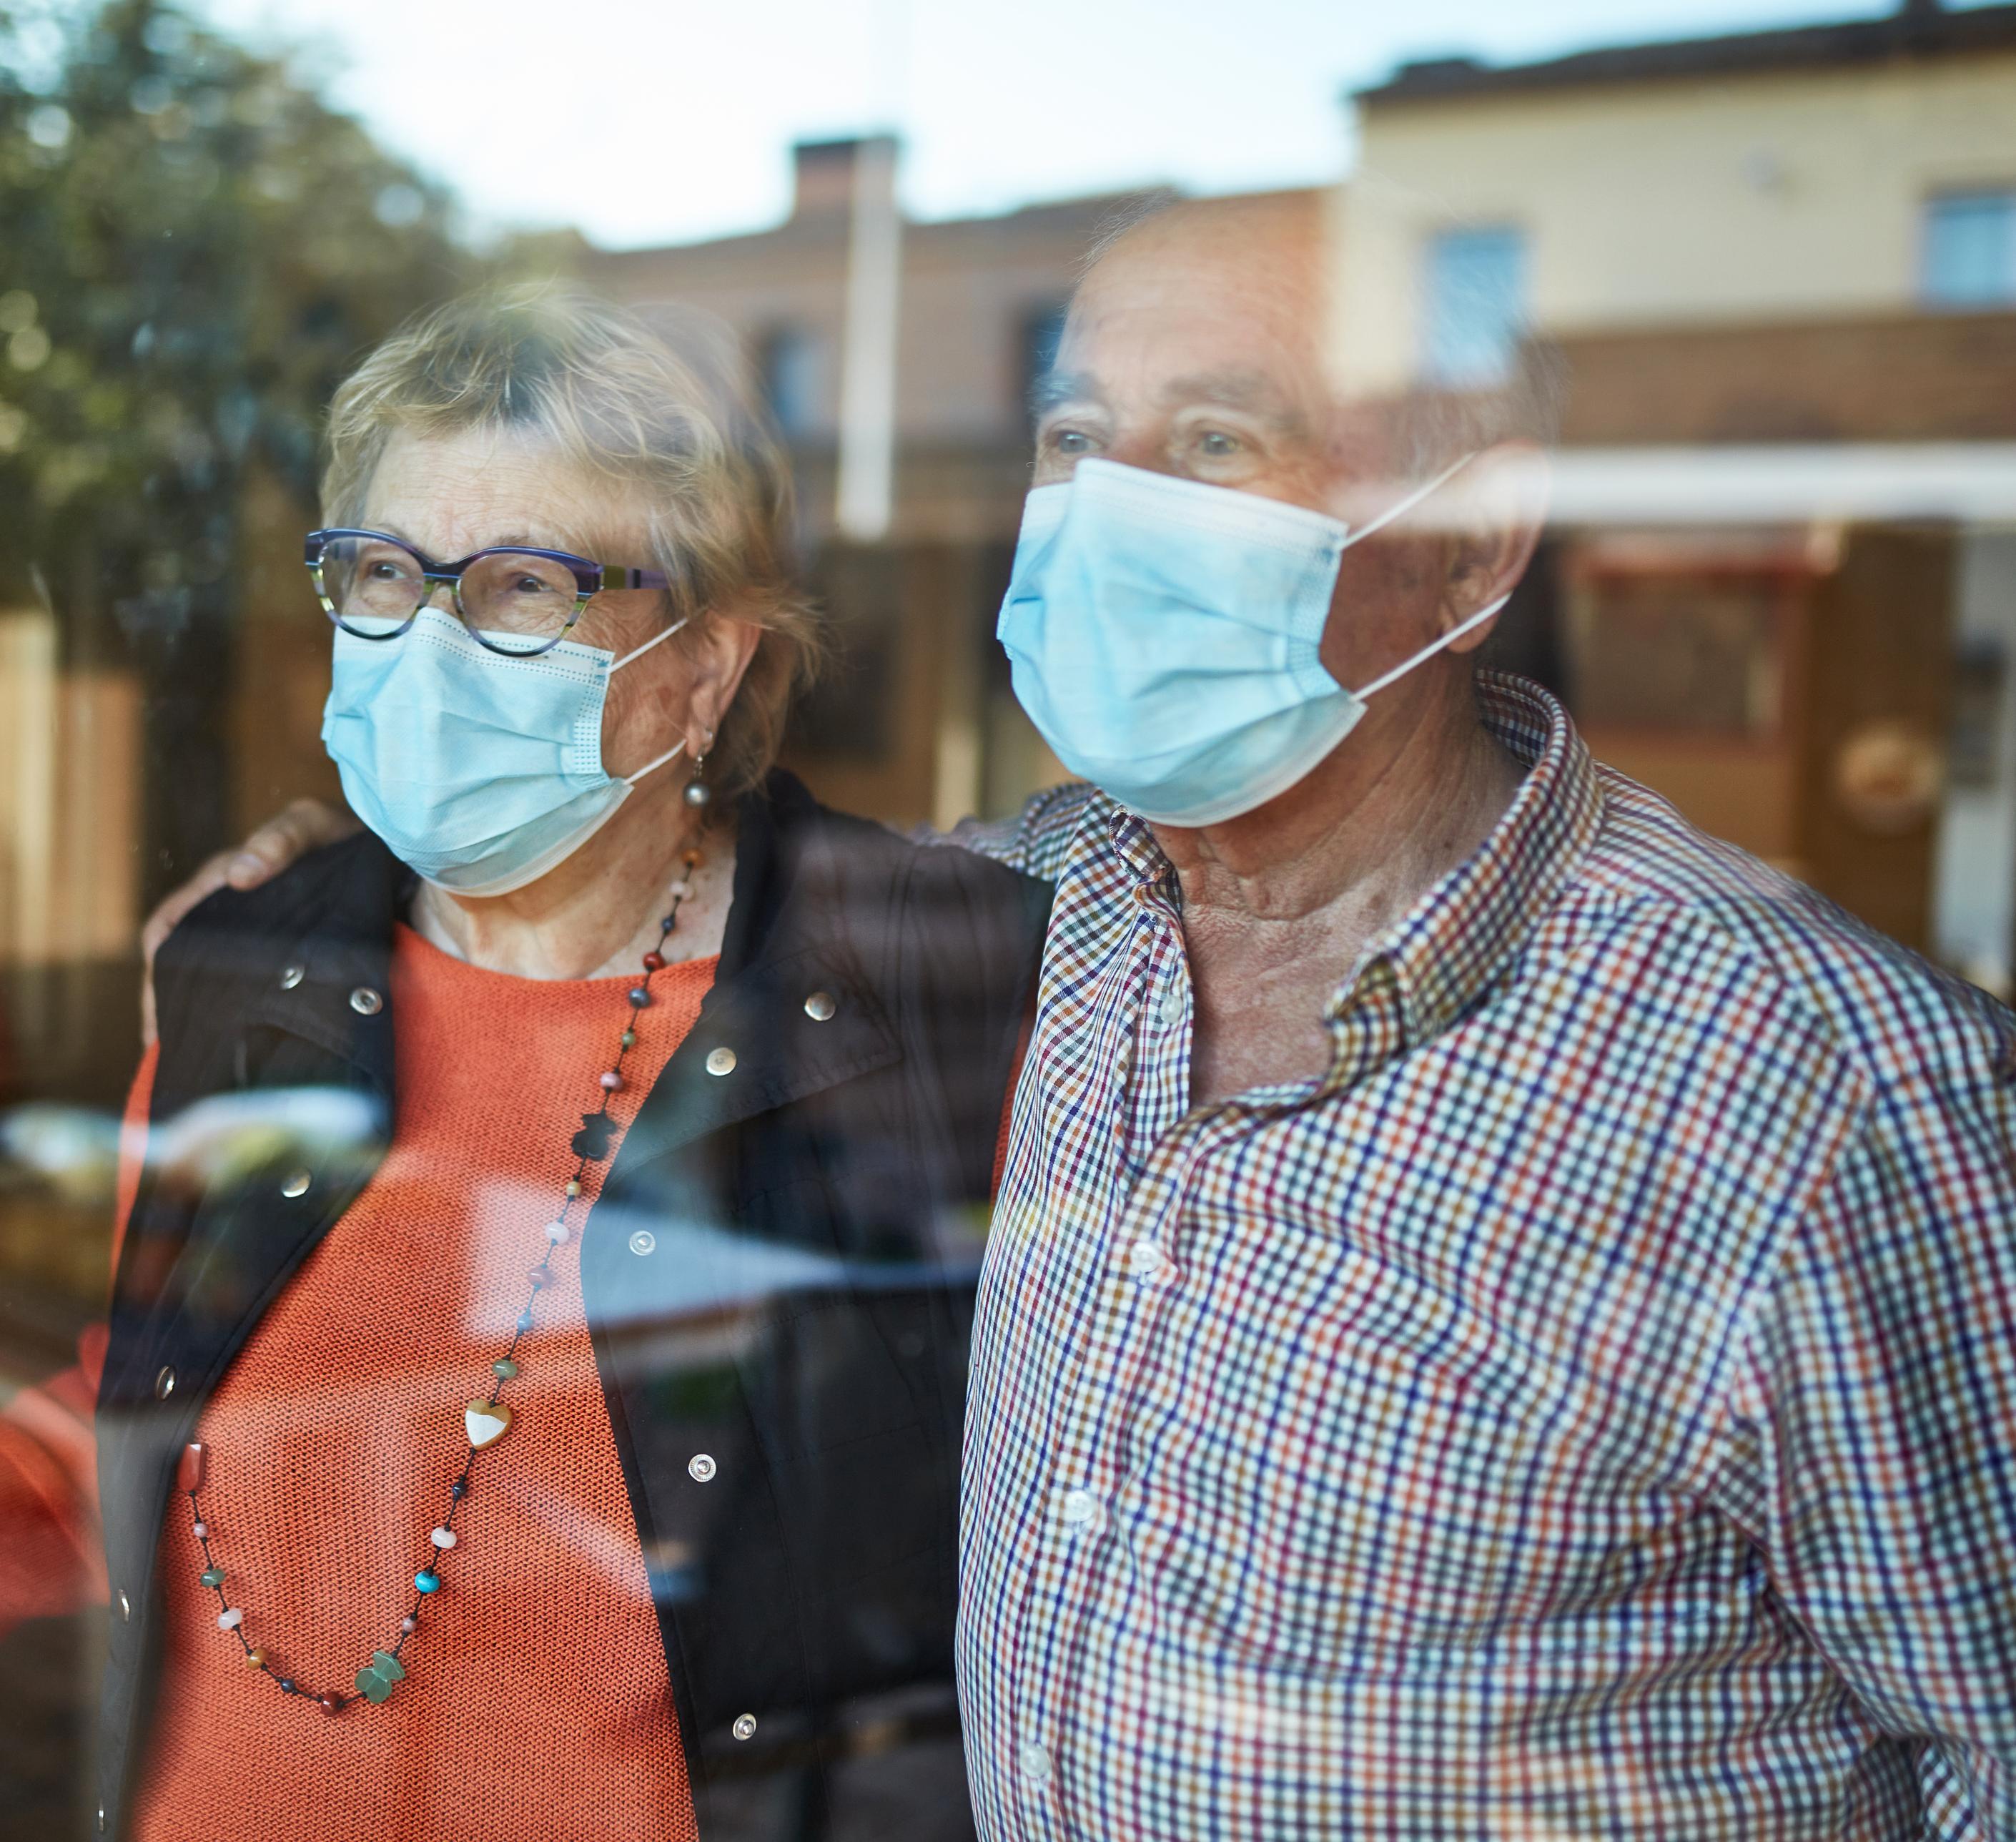 Seniors in an independent living facility wearing masks to protect from COVID-19